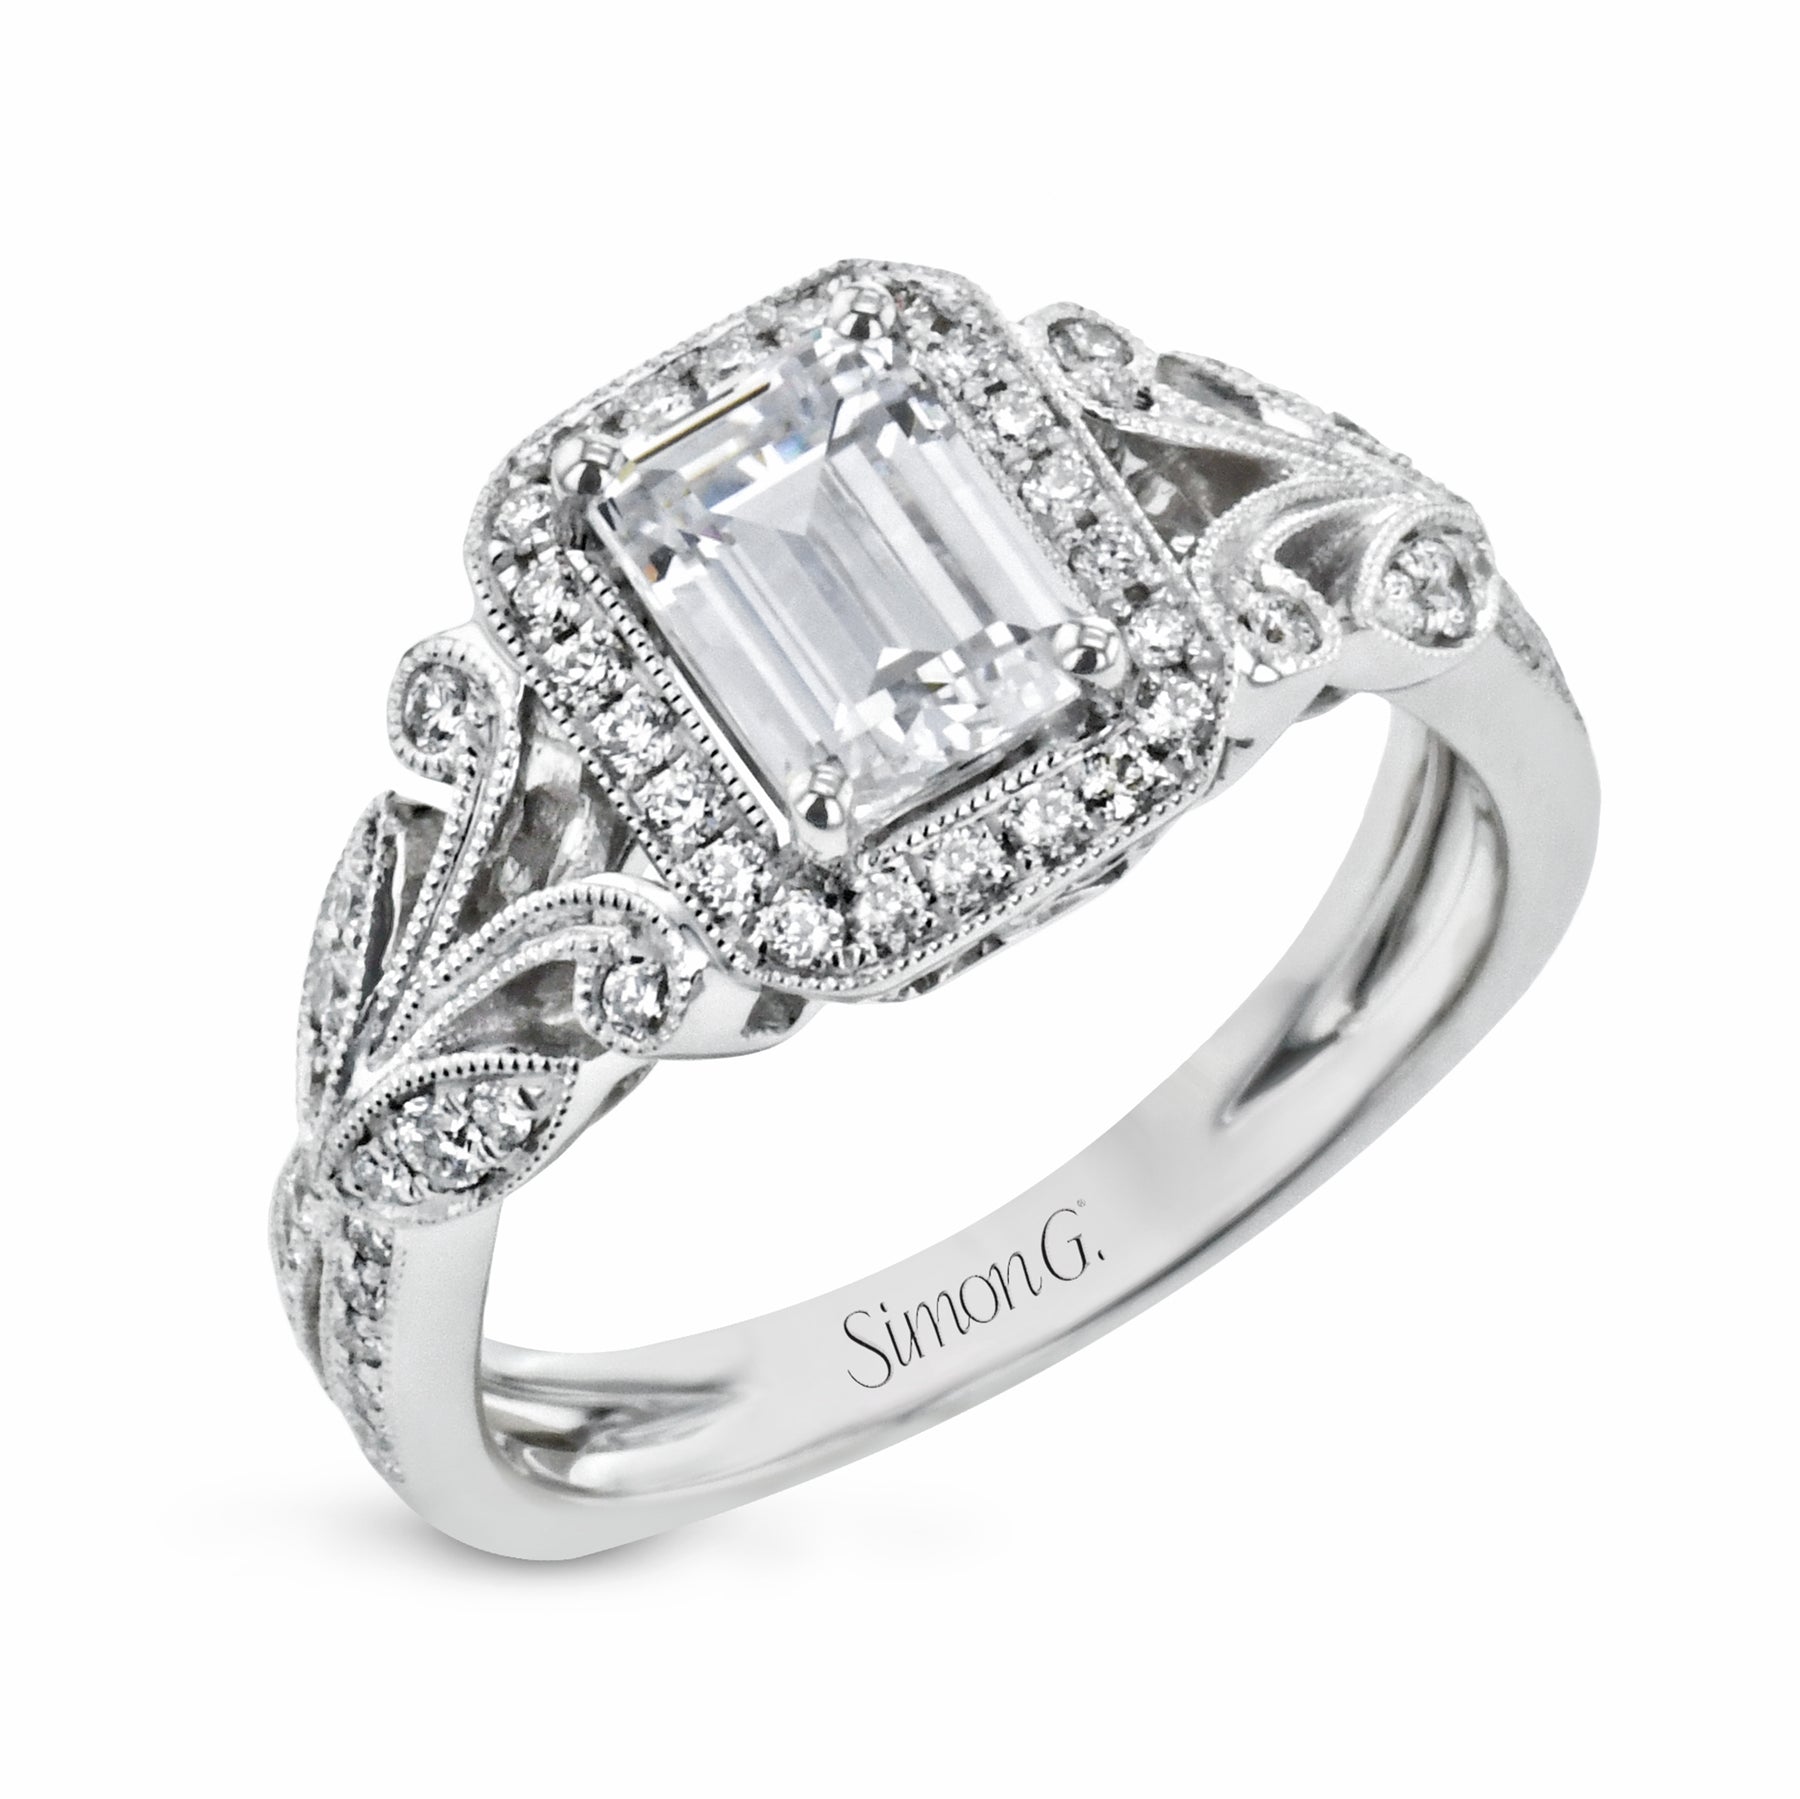 Emerald-Cut Halo Engagement Ring In 18k Gold With Diamonds TR629-EM